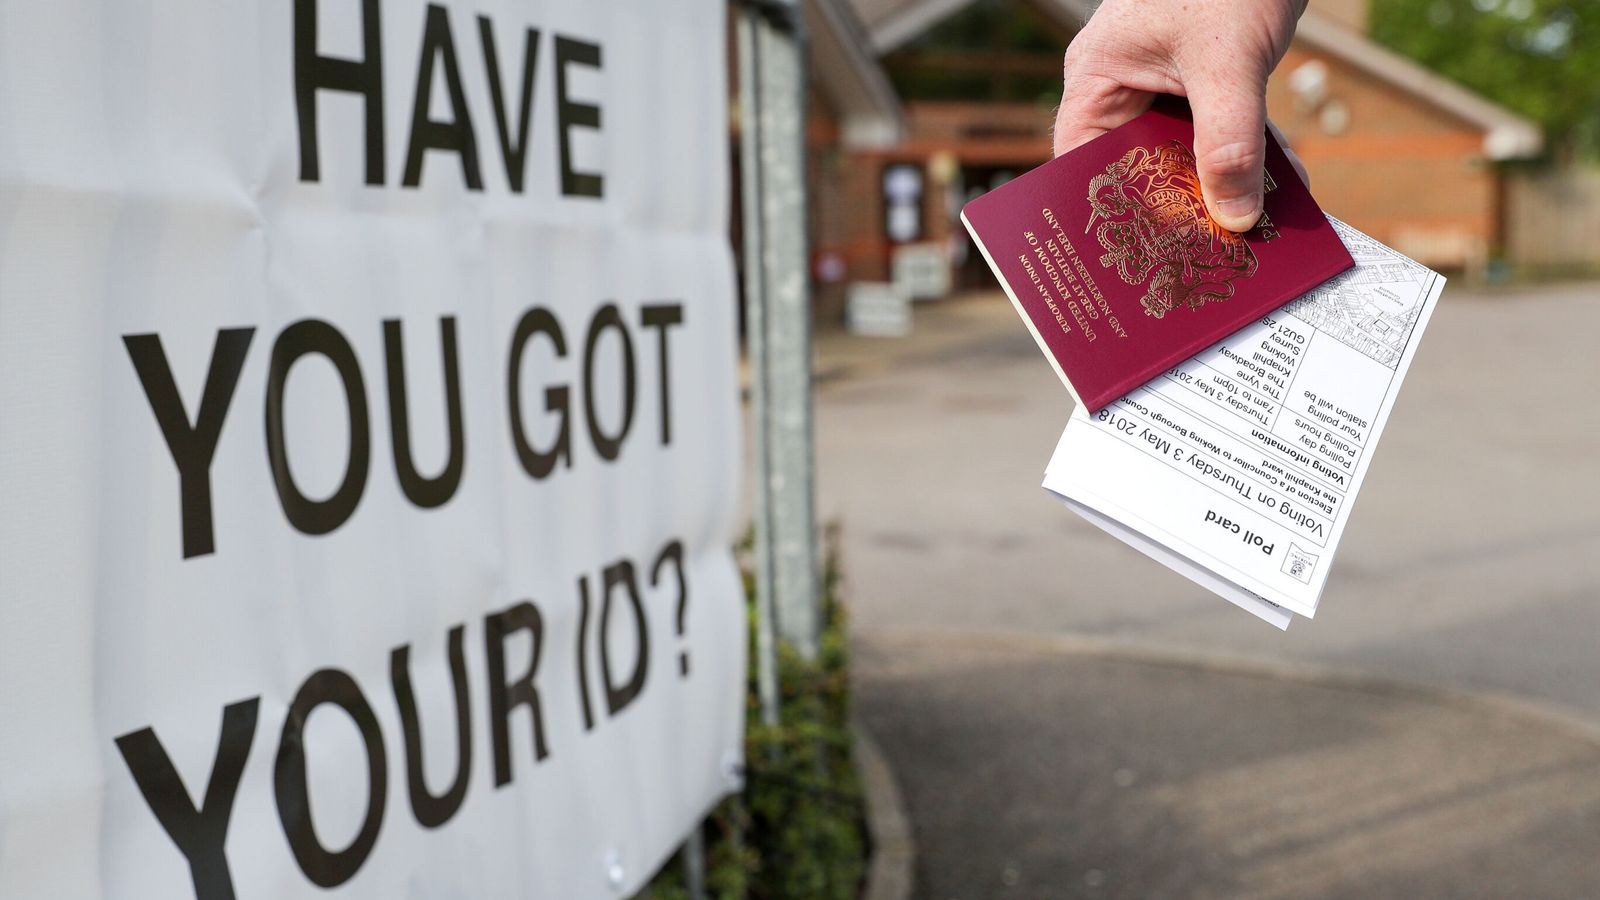 14,000 people couldn't vote in local elections because they didn't have ID under new rules